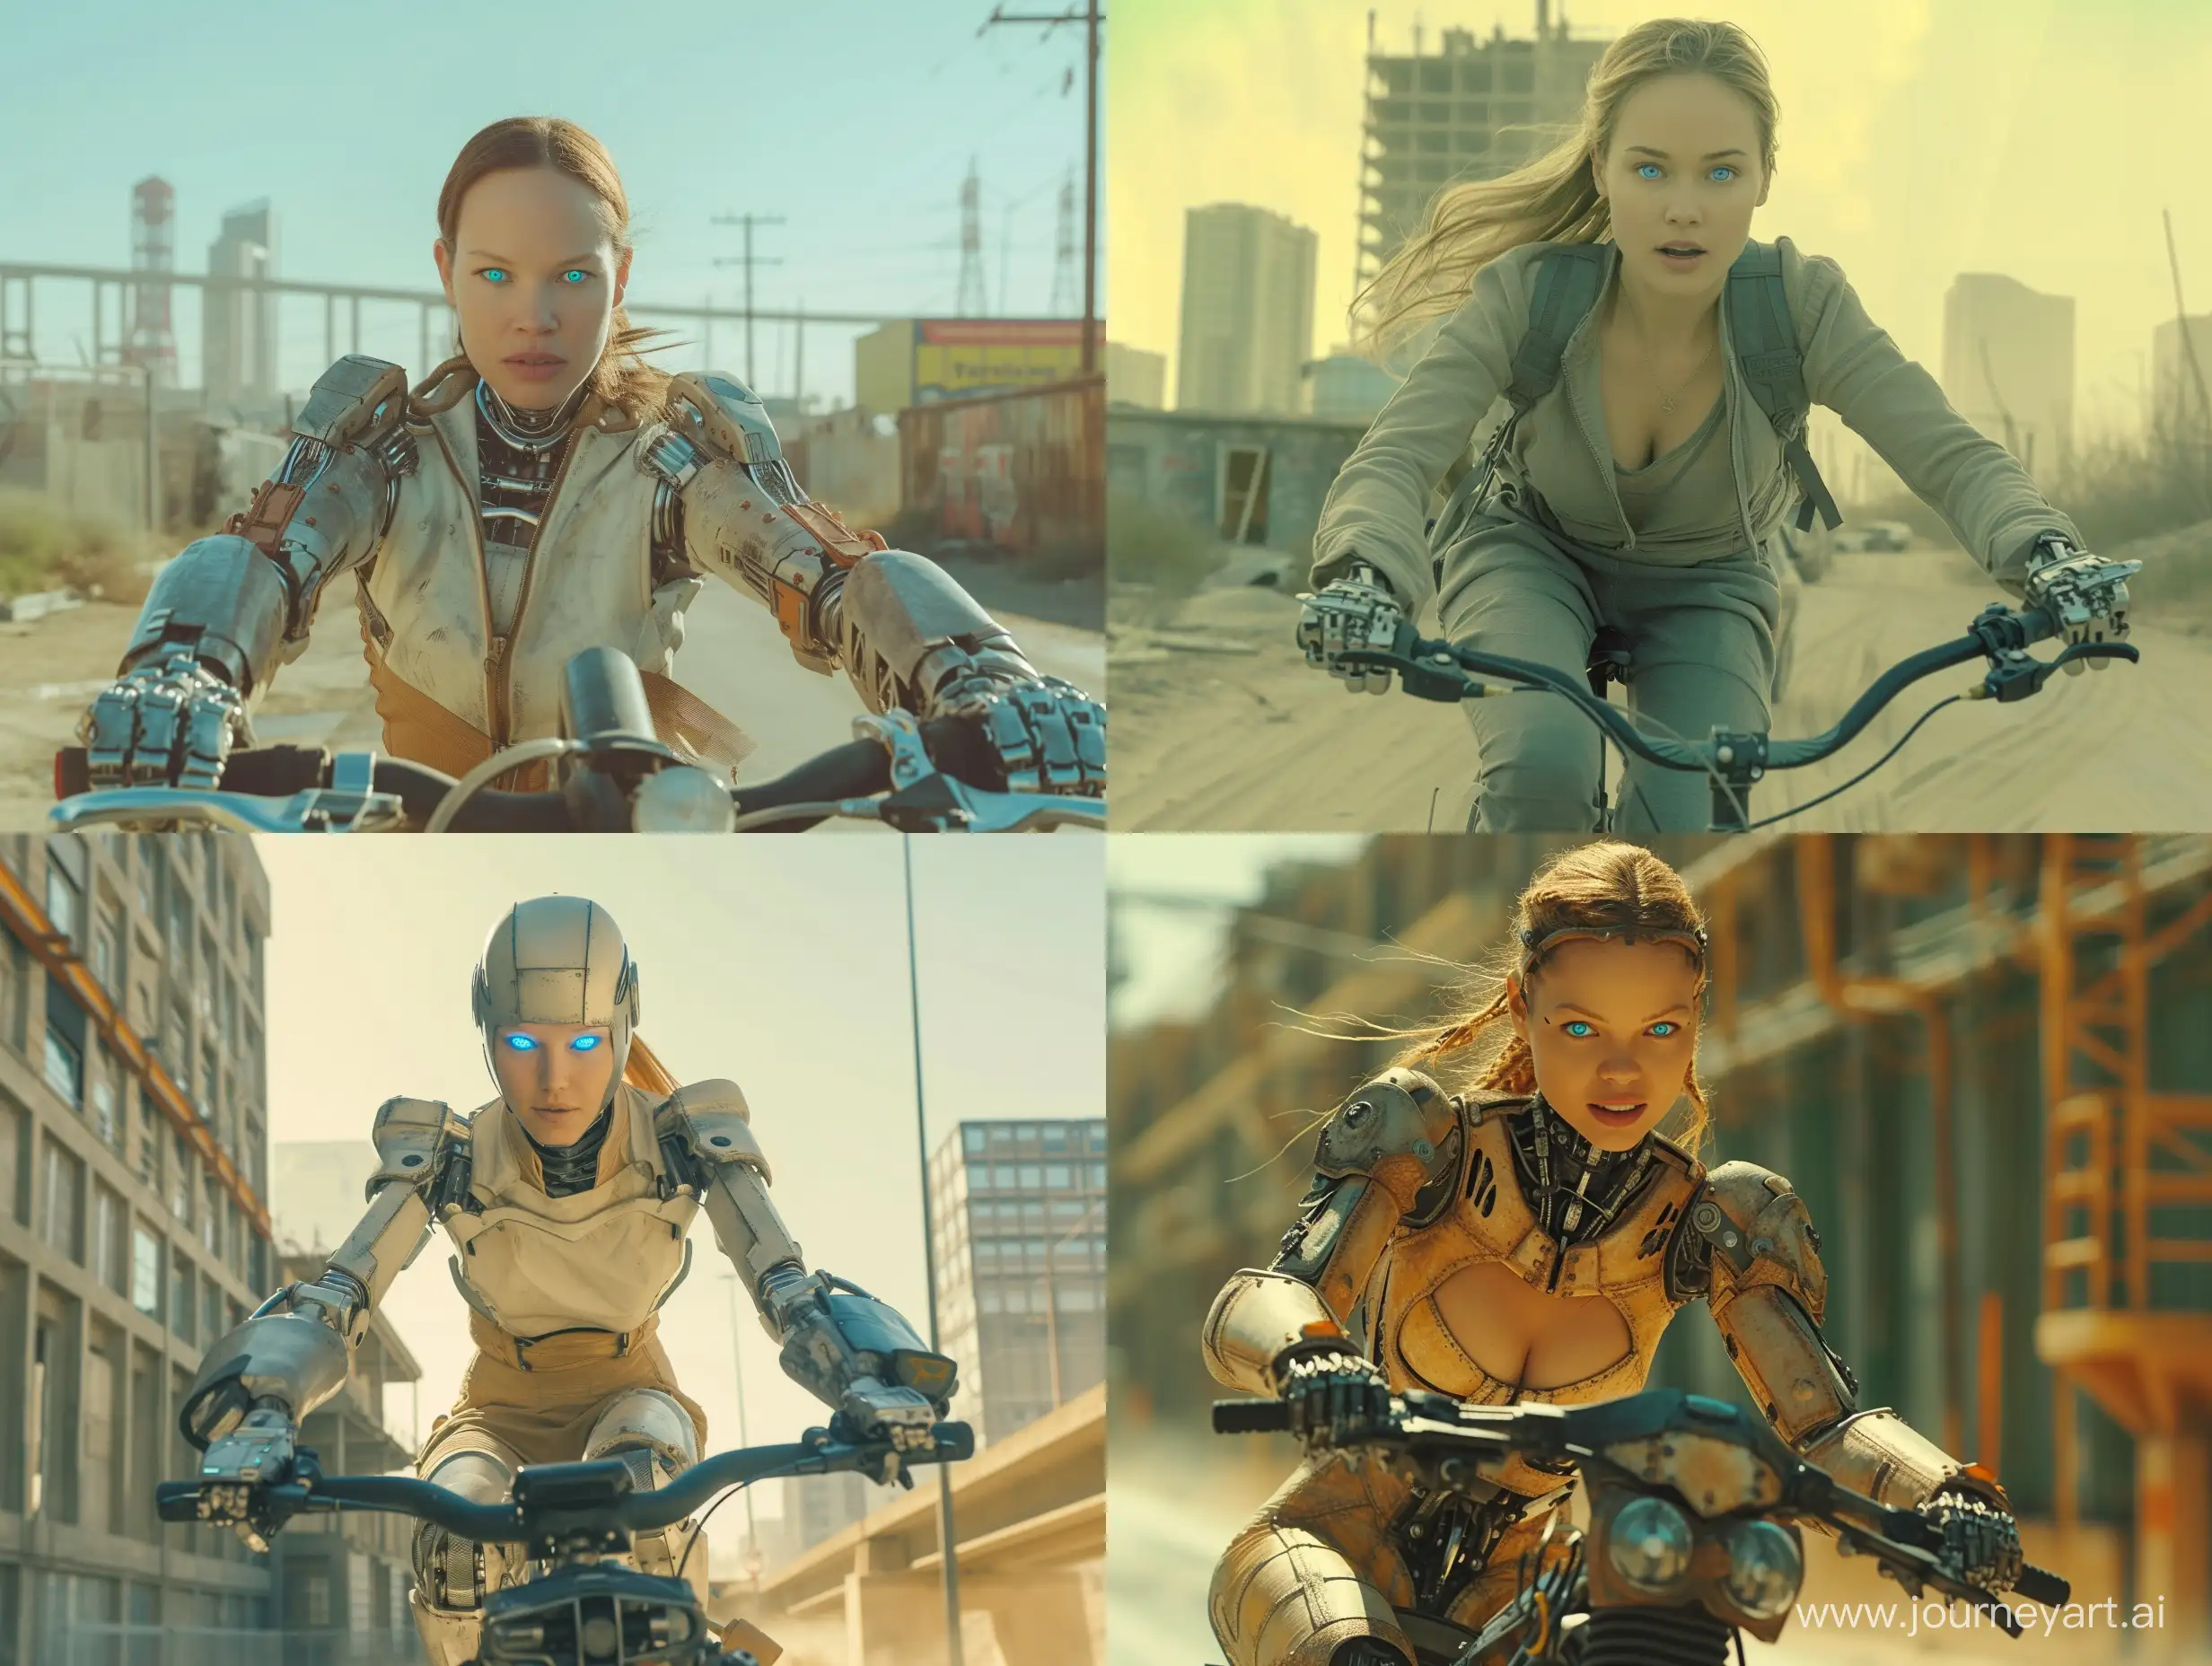 a old 2000s sci fi movie still of a  cyborg woman riding on her bike, nostalgia, they have blue eyes, open area, full body, outside city environment, dystopian,
